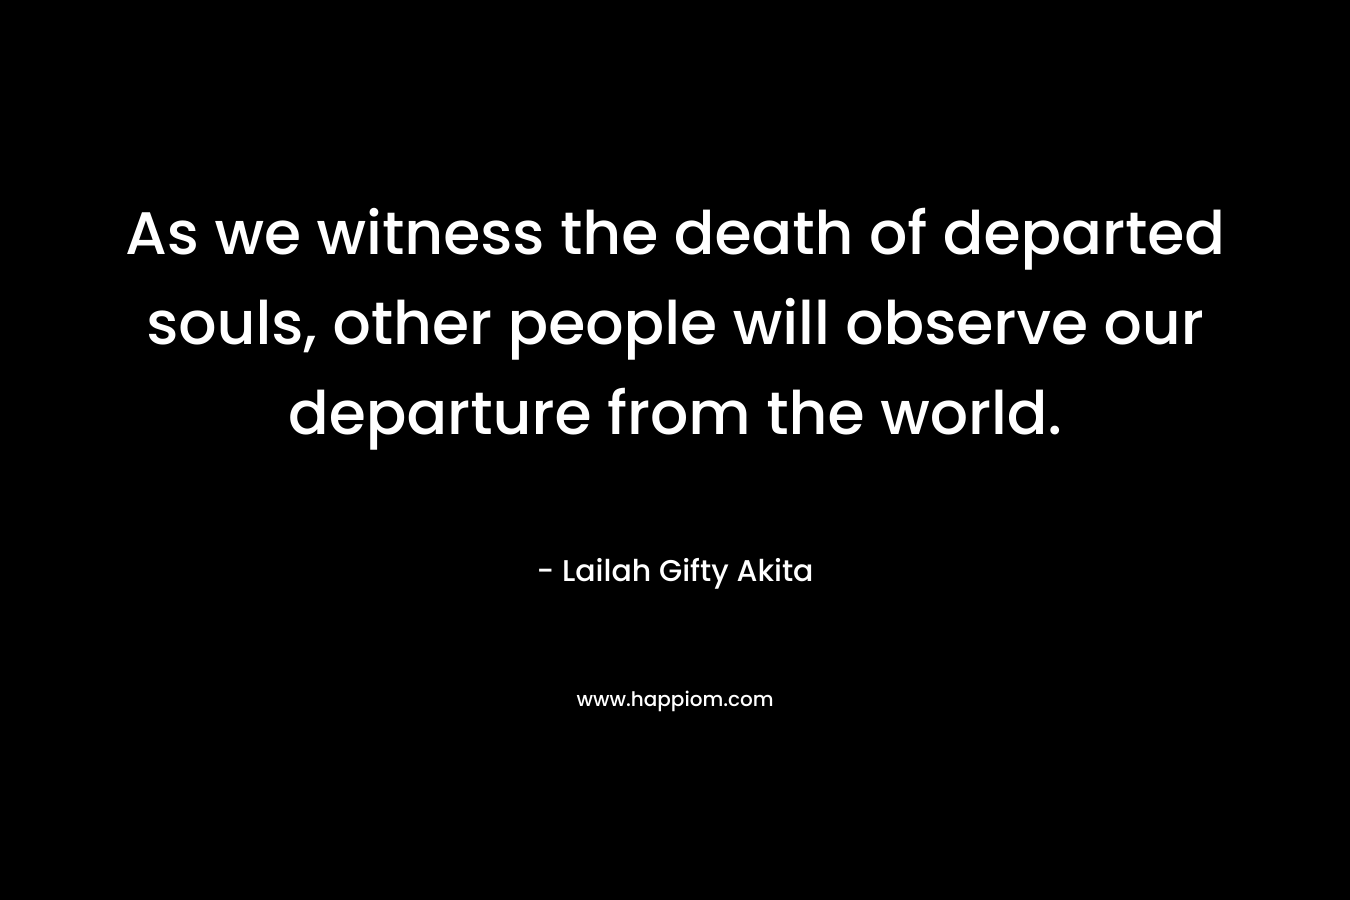 As we witness the death of departed souls, other people will observe our departure from the world.